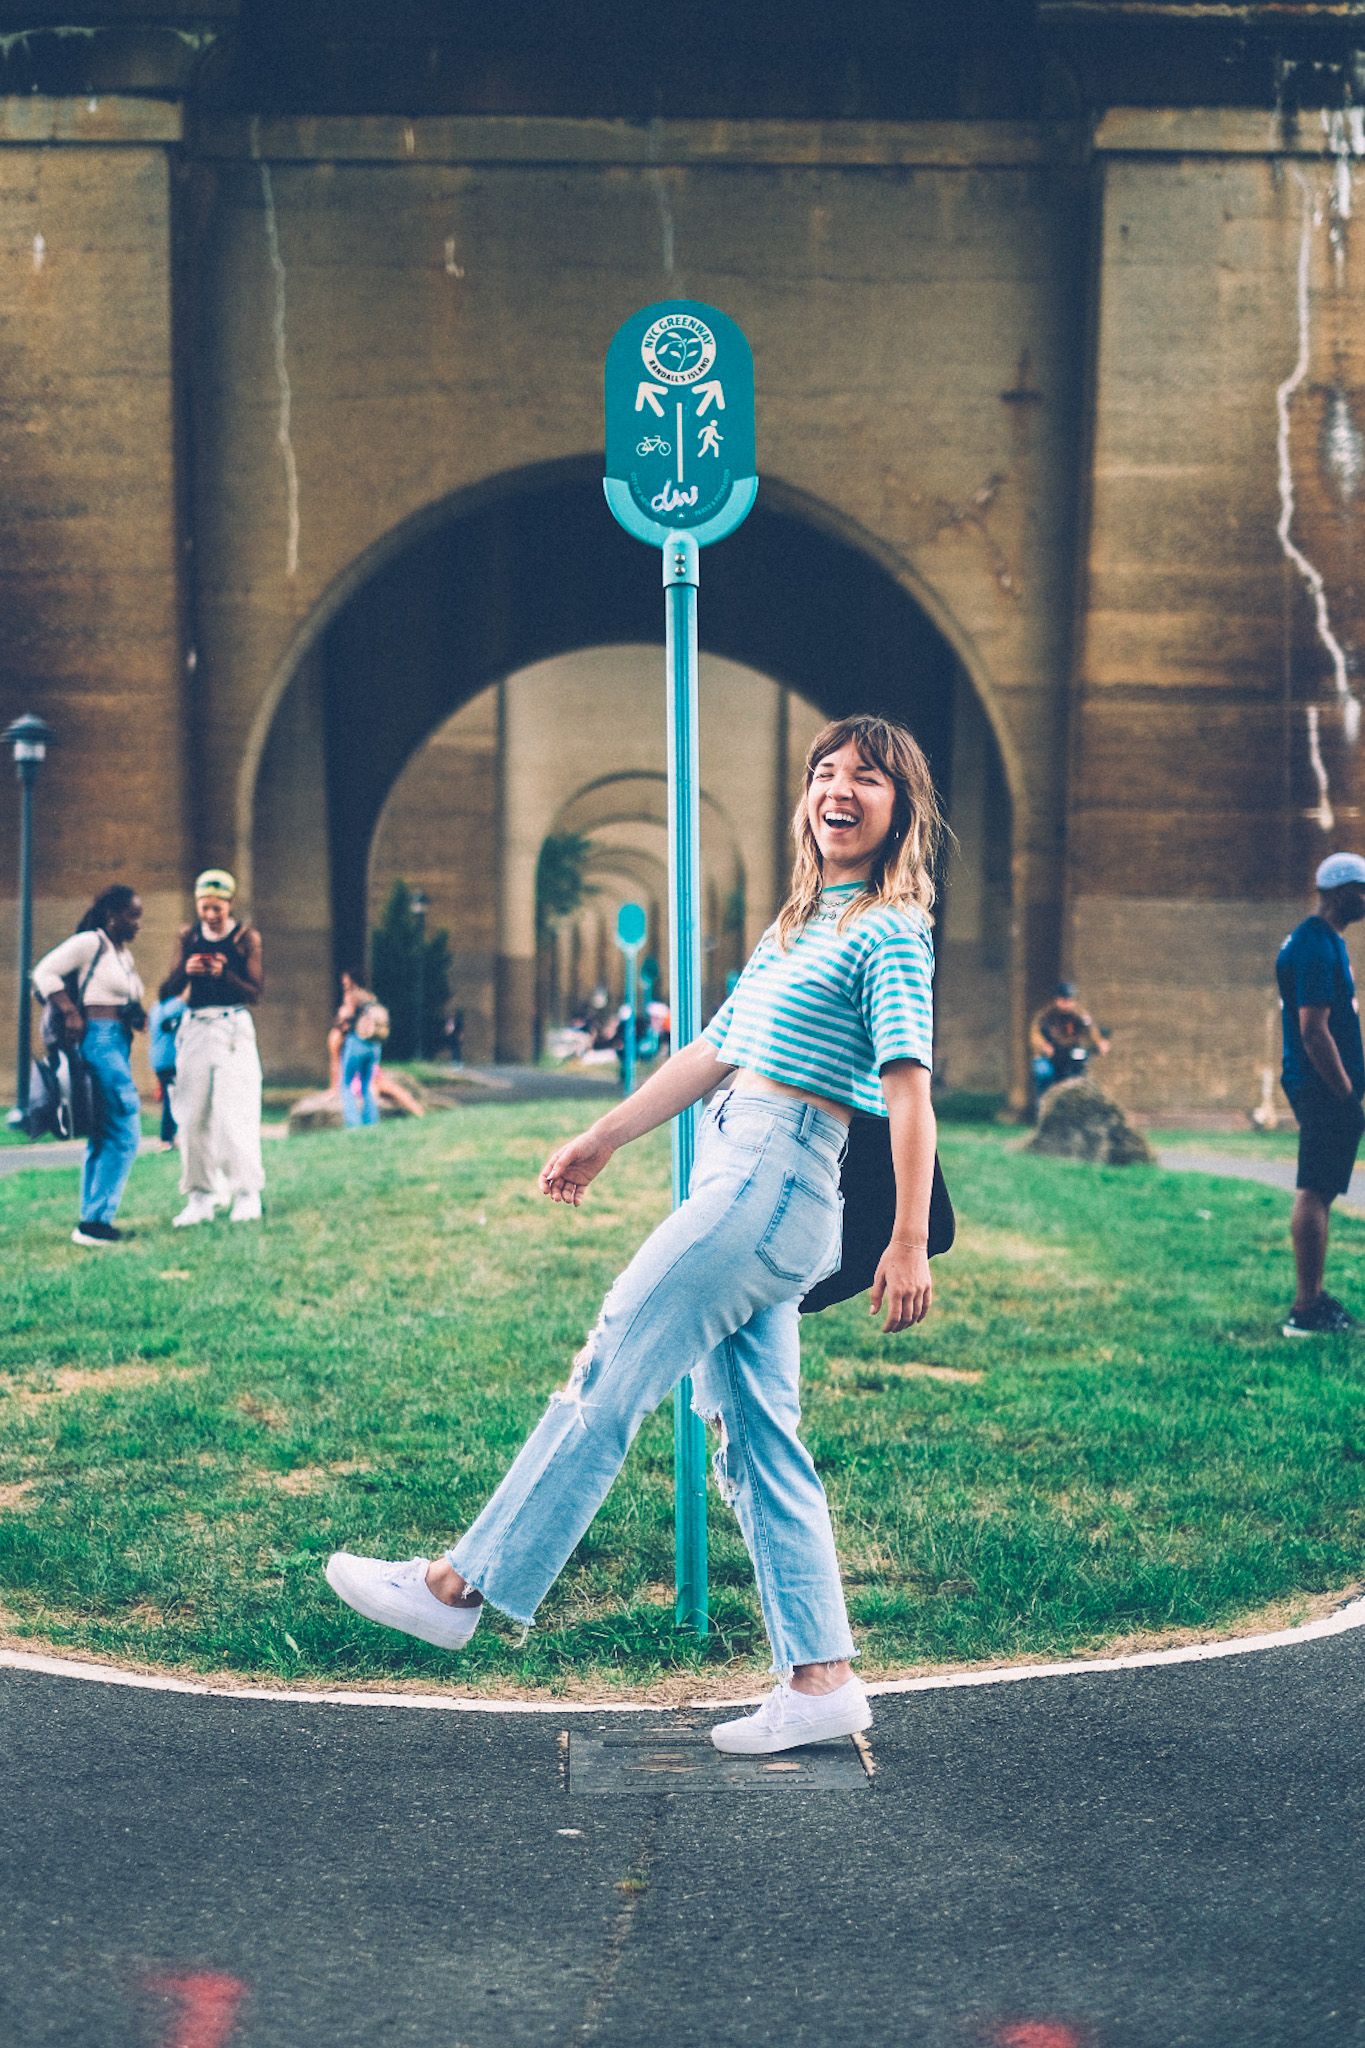 A woman kicks her leg out in front of her while standing in front of a turquoise pedestrian sign, laughing in front of arches of a bridge in the background.